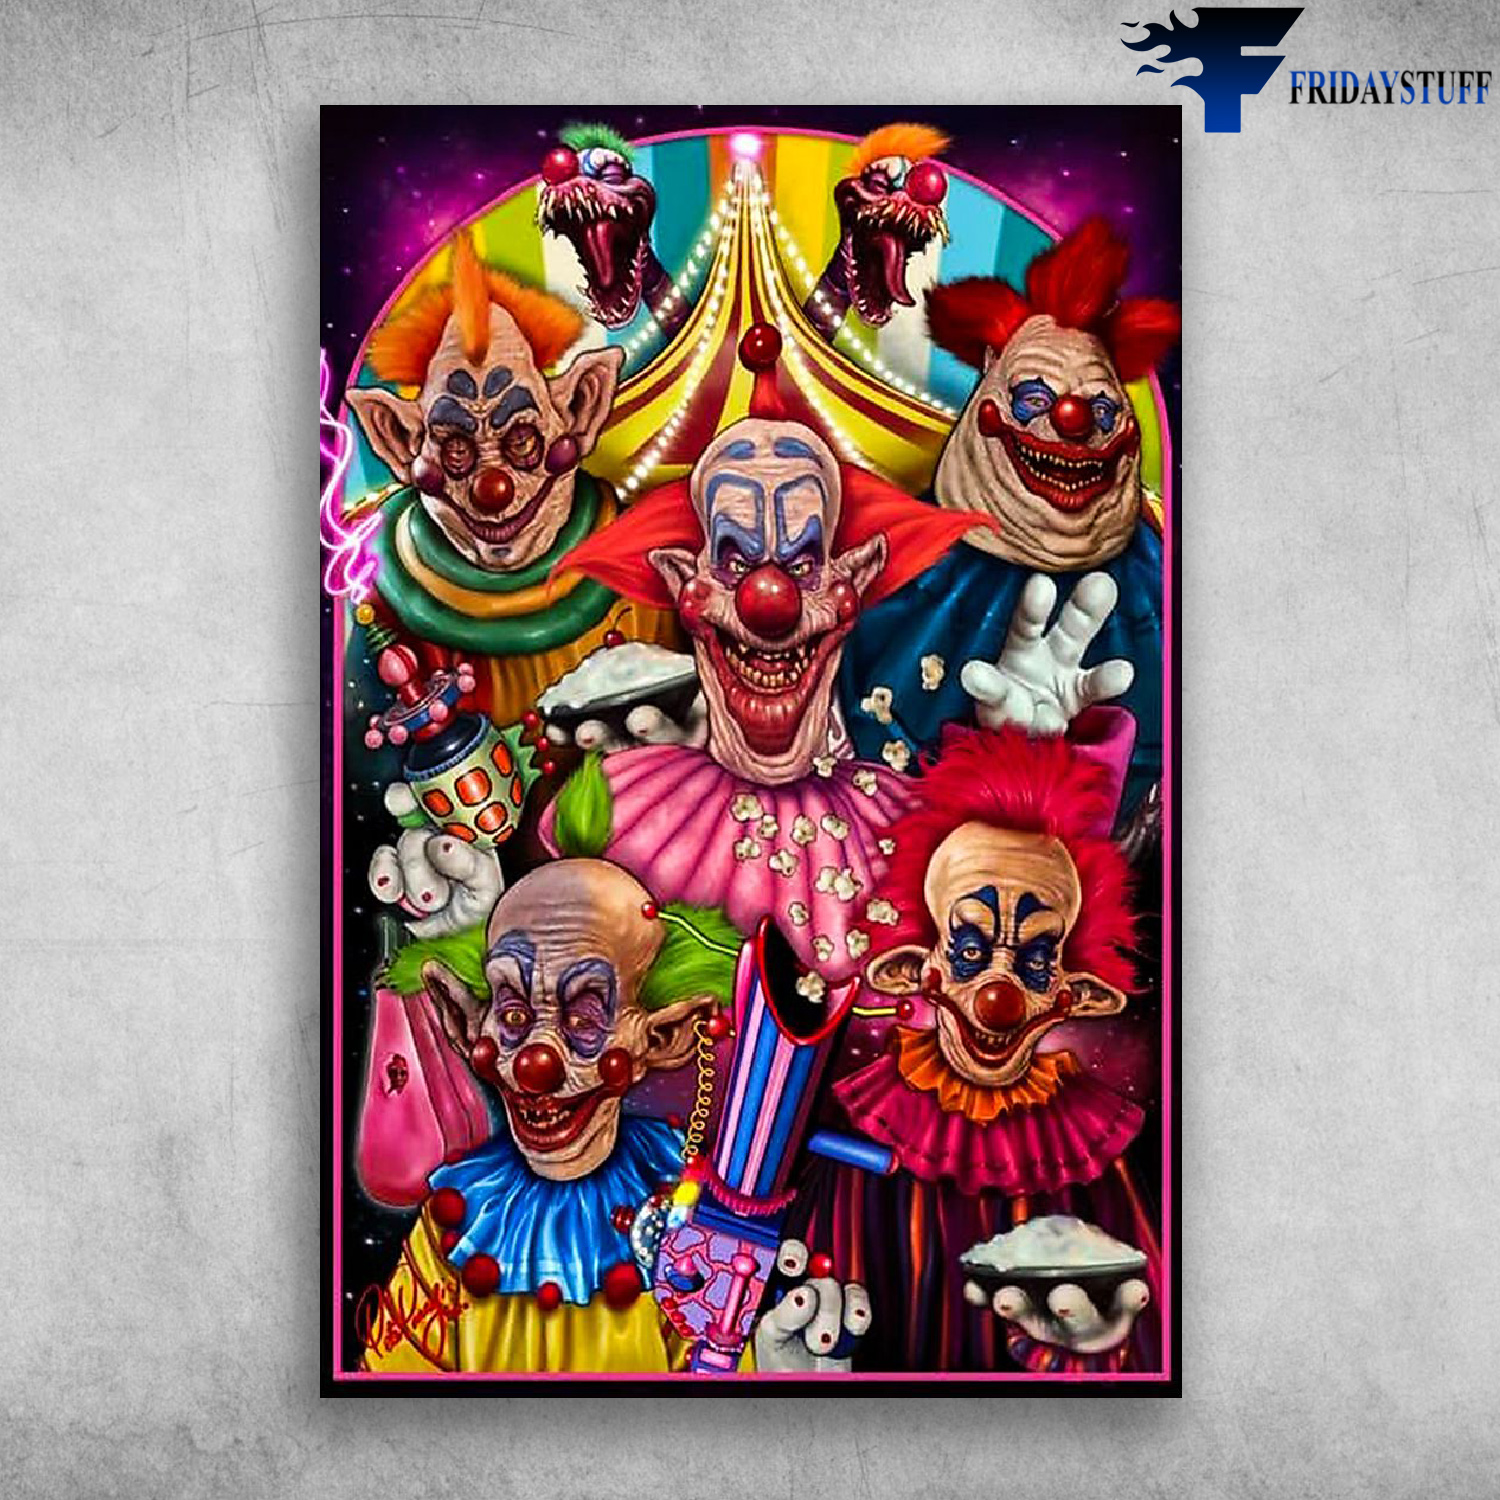 Killer Klowns From Outer Space 1998